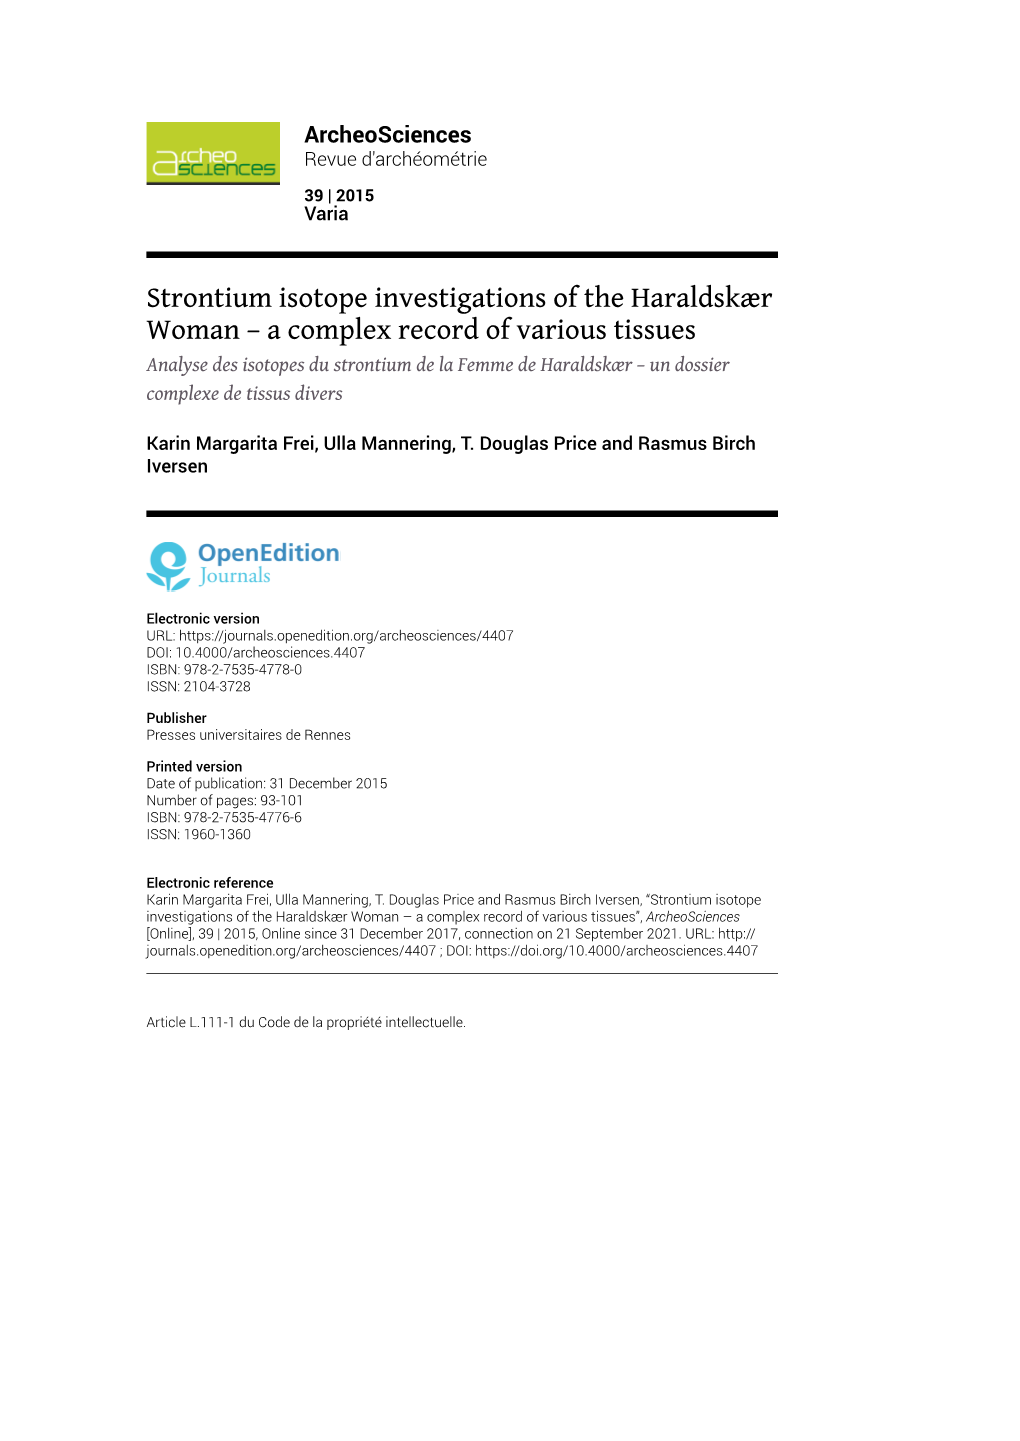 Strontium Isotope Investigations of the Haraldskær Woman